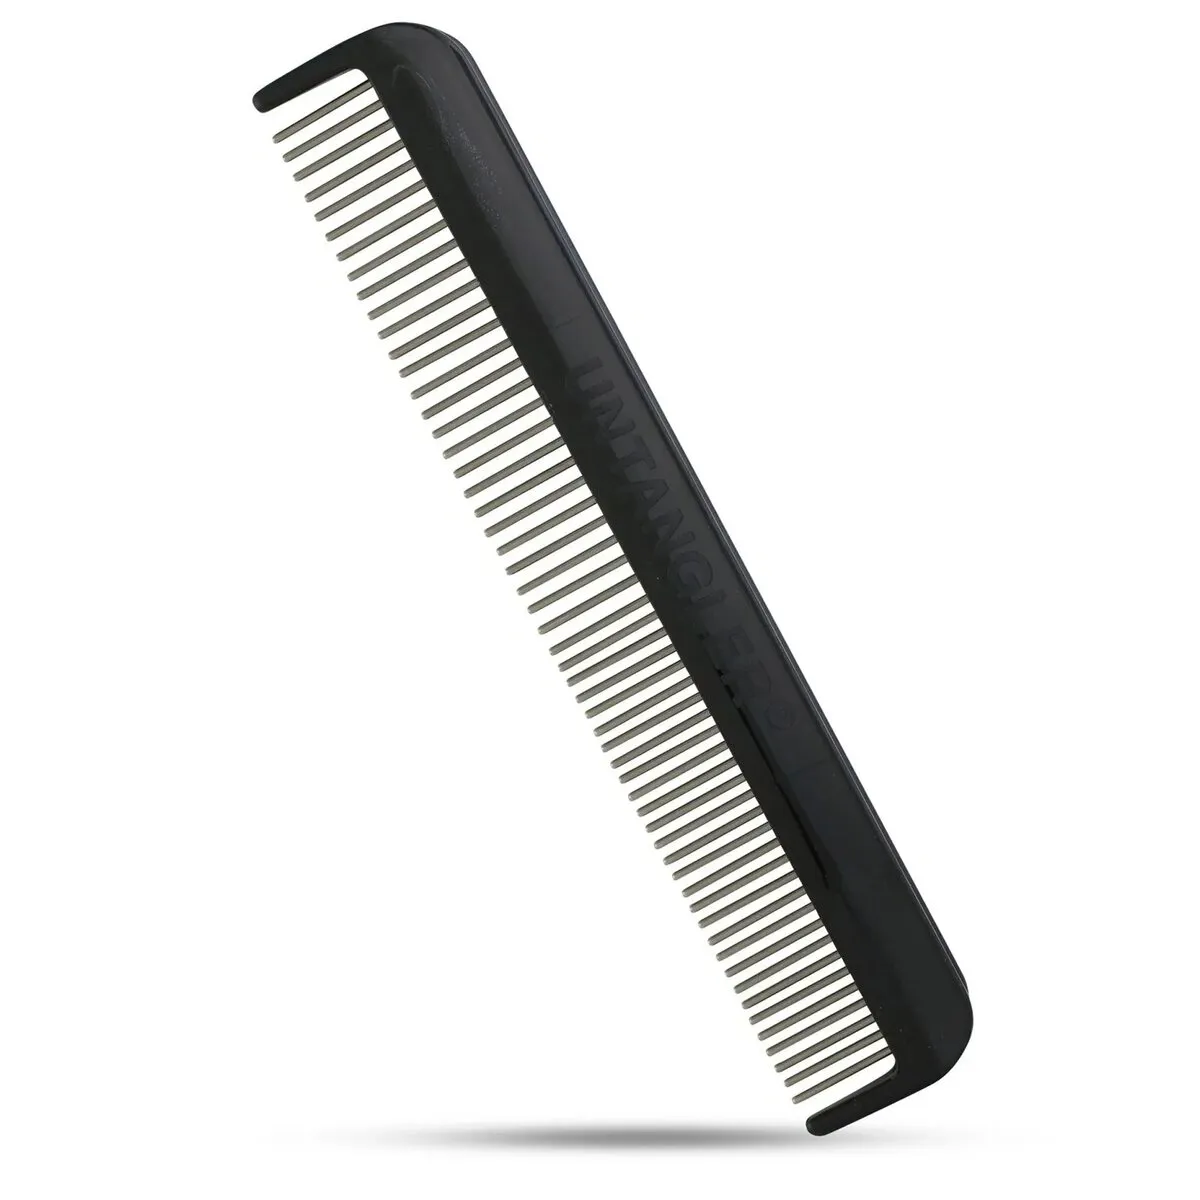 The Untangler - 7″ Pet Comb (55 Dual-spaced teeth) – smooth rotating teeth reduce painful grooming! (T727PG)